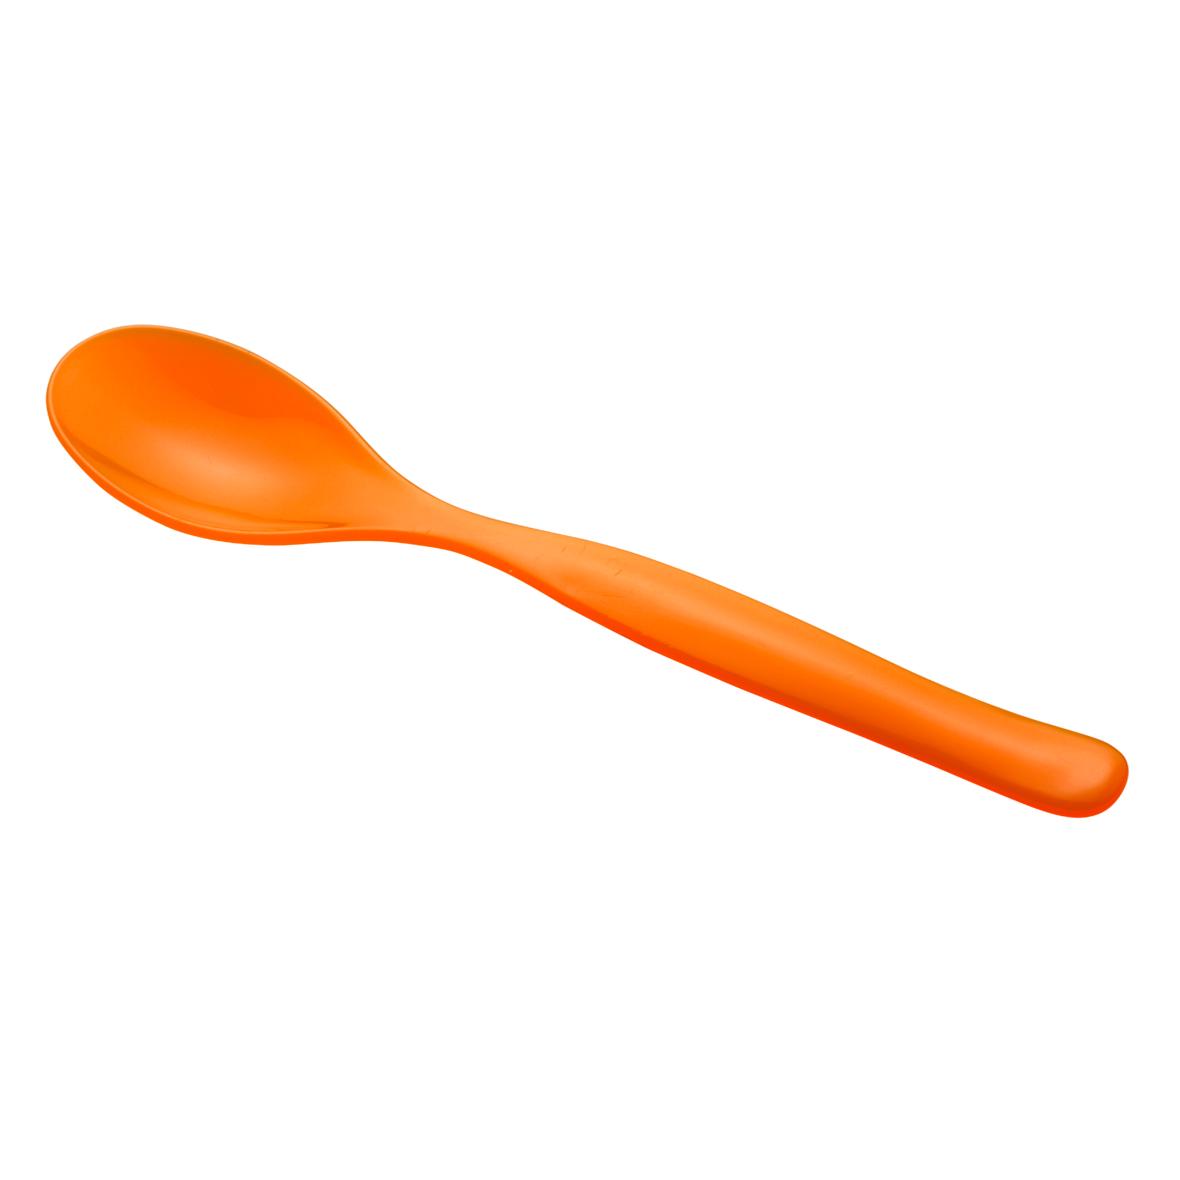 Plastic Spoon - Nether Wasdale - Charmouth